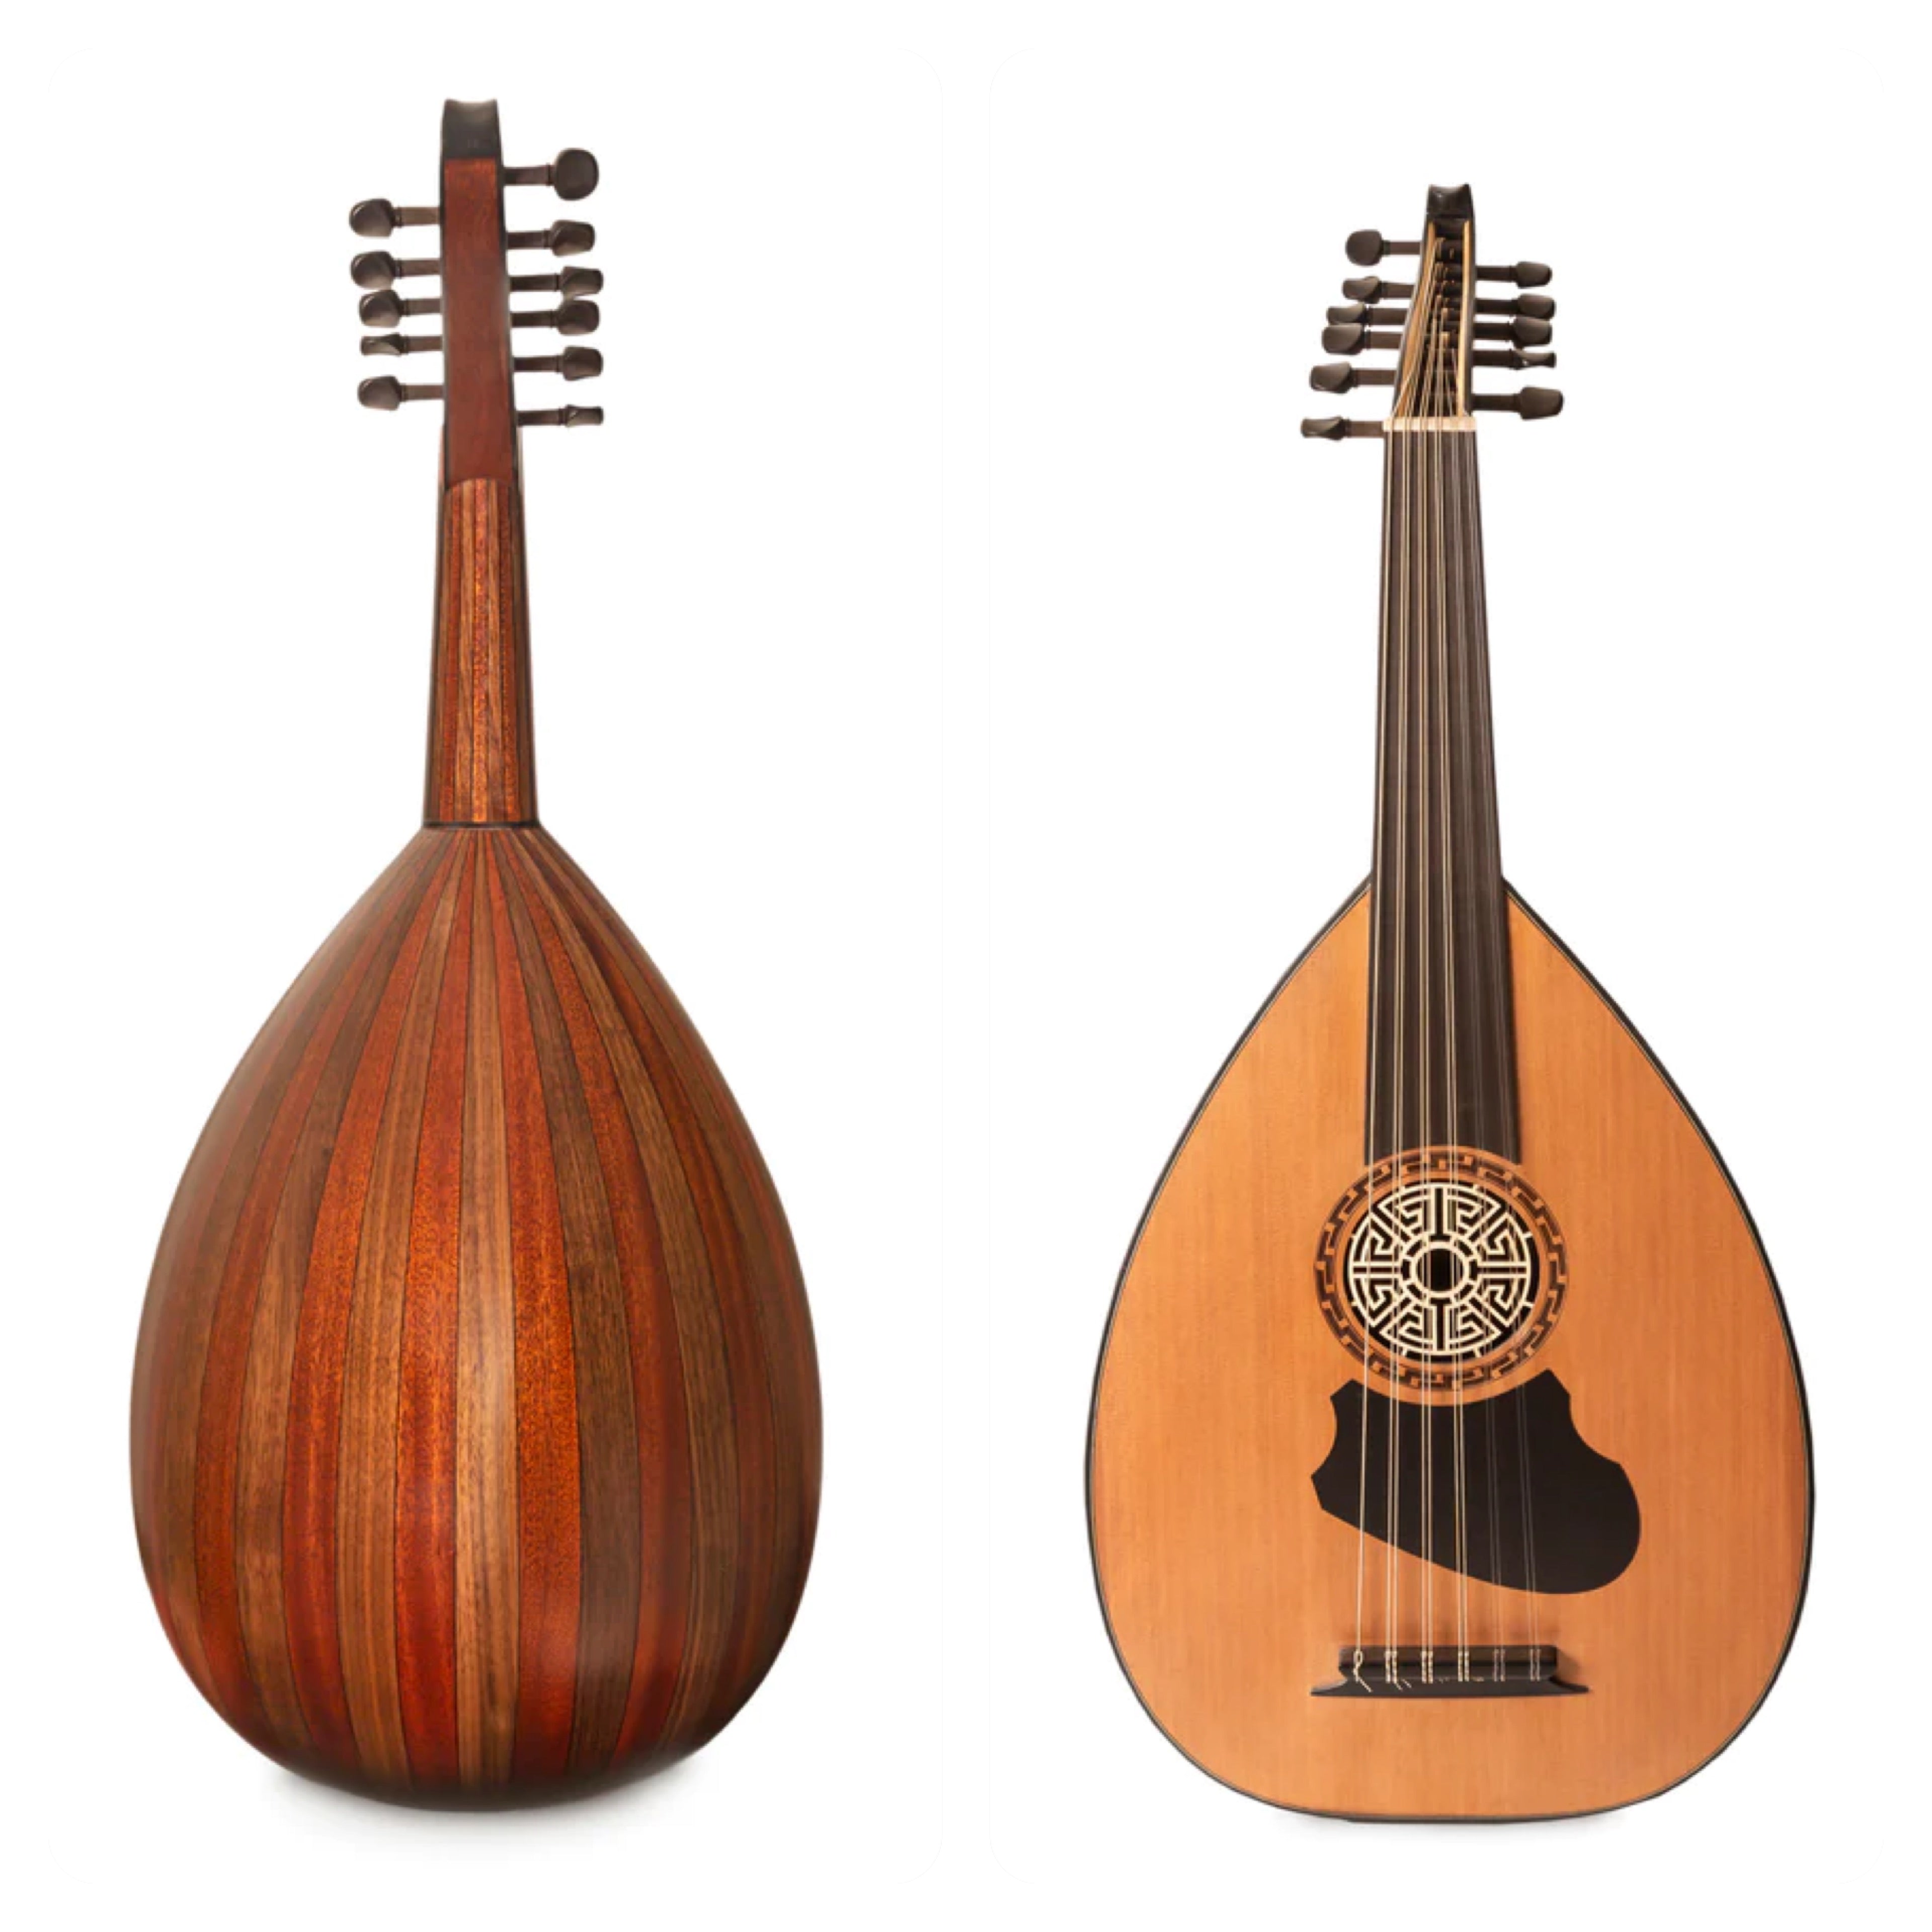 Tips for Purchasing a good Oud